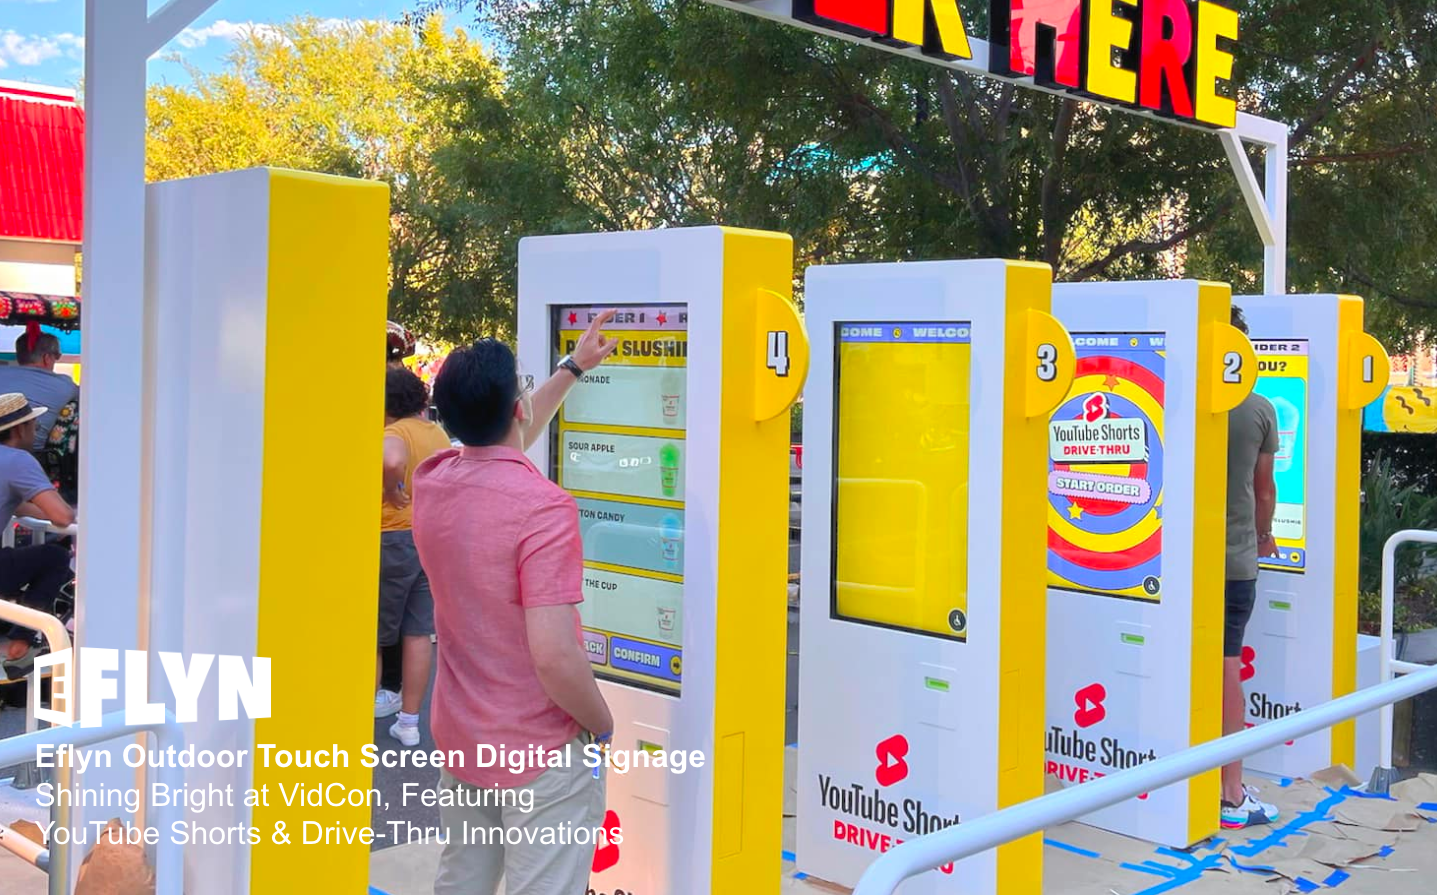 Case Study: YouTube Shorts Drive-Thru Experience at VidCon with Eflyn Outdoor Digital Signage and Digital Kiosks